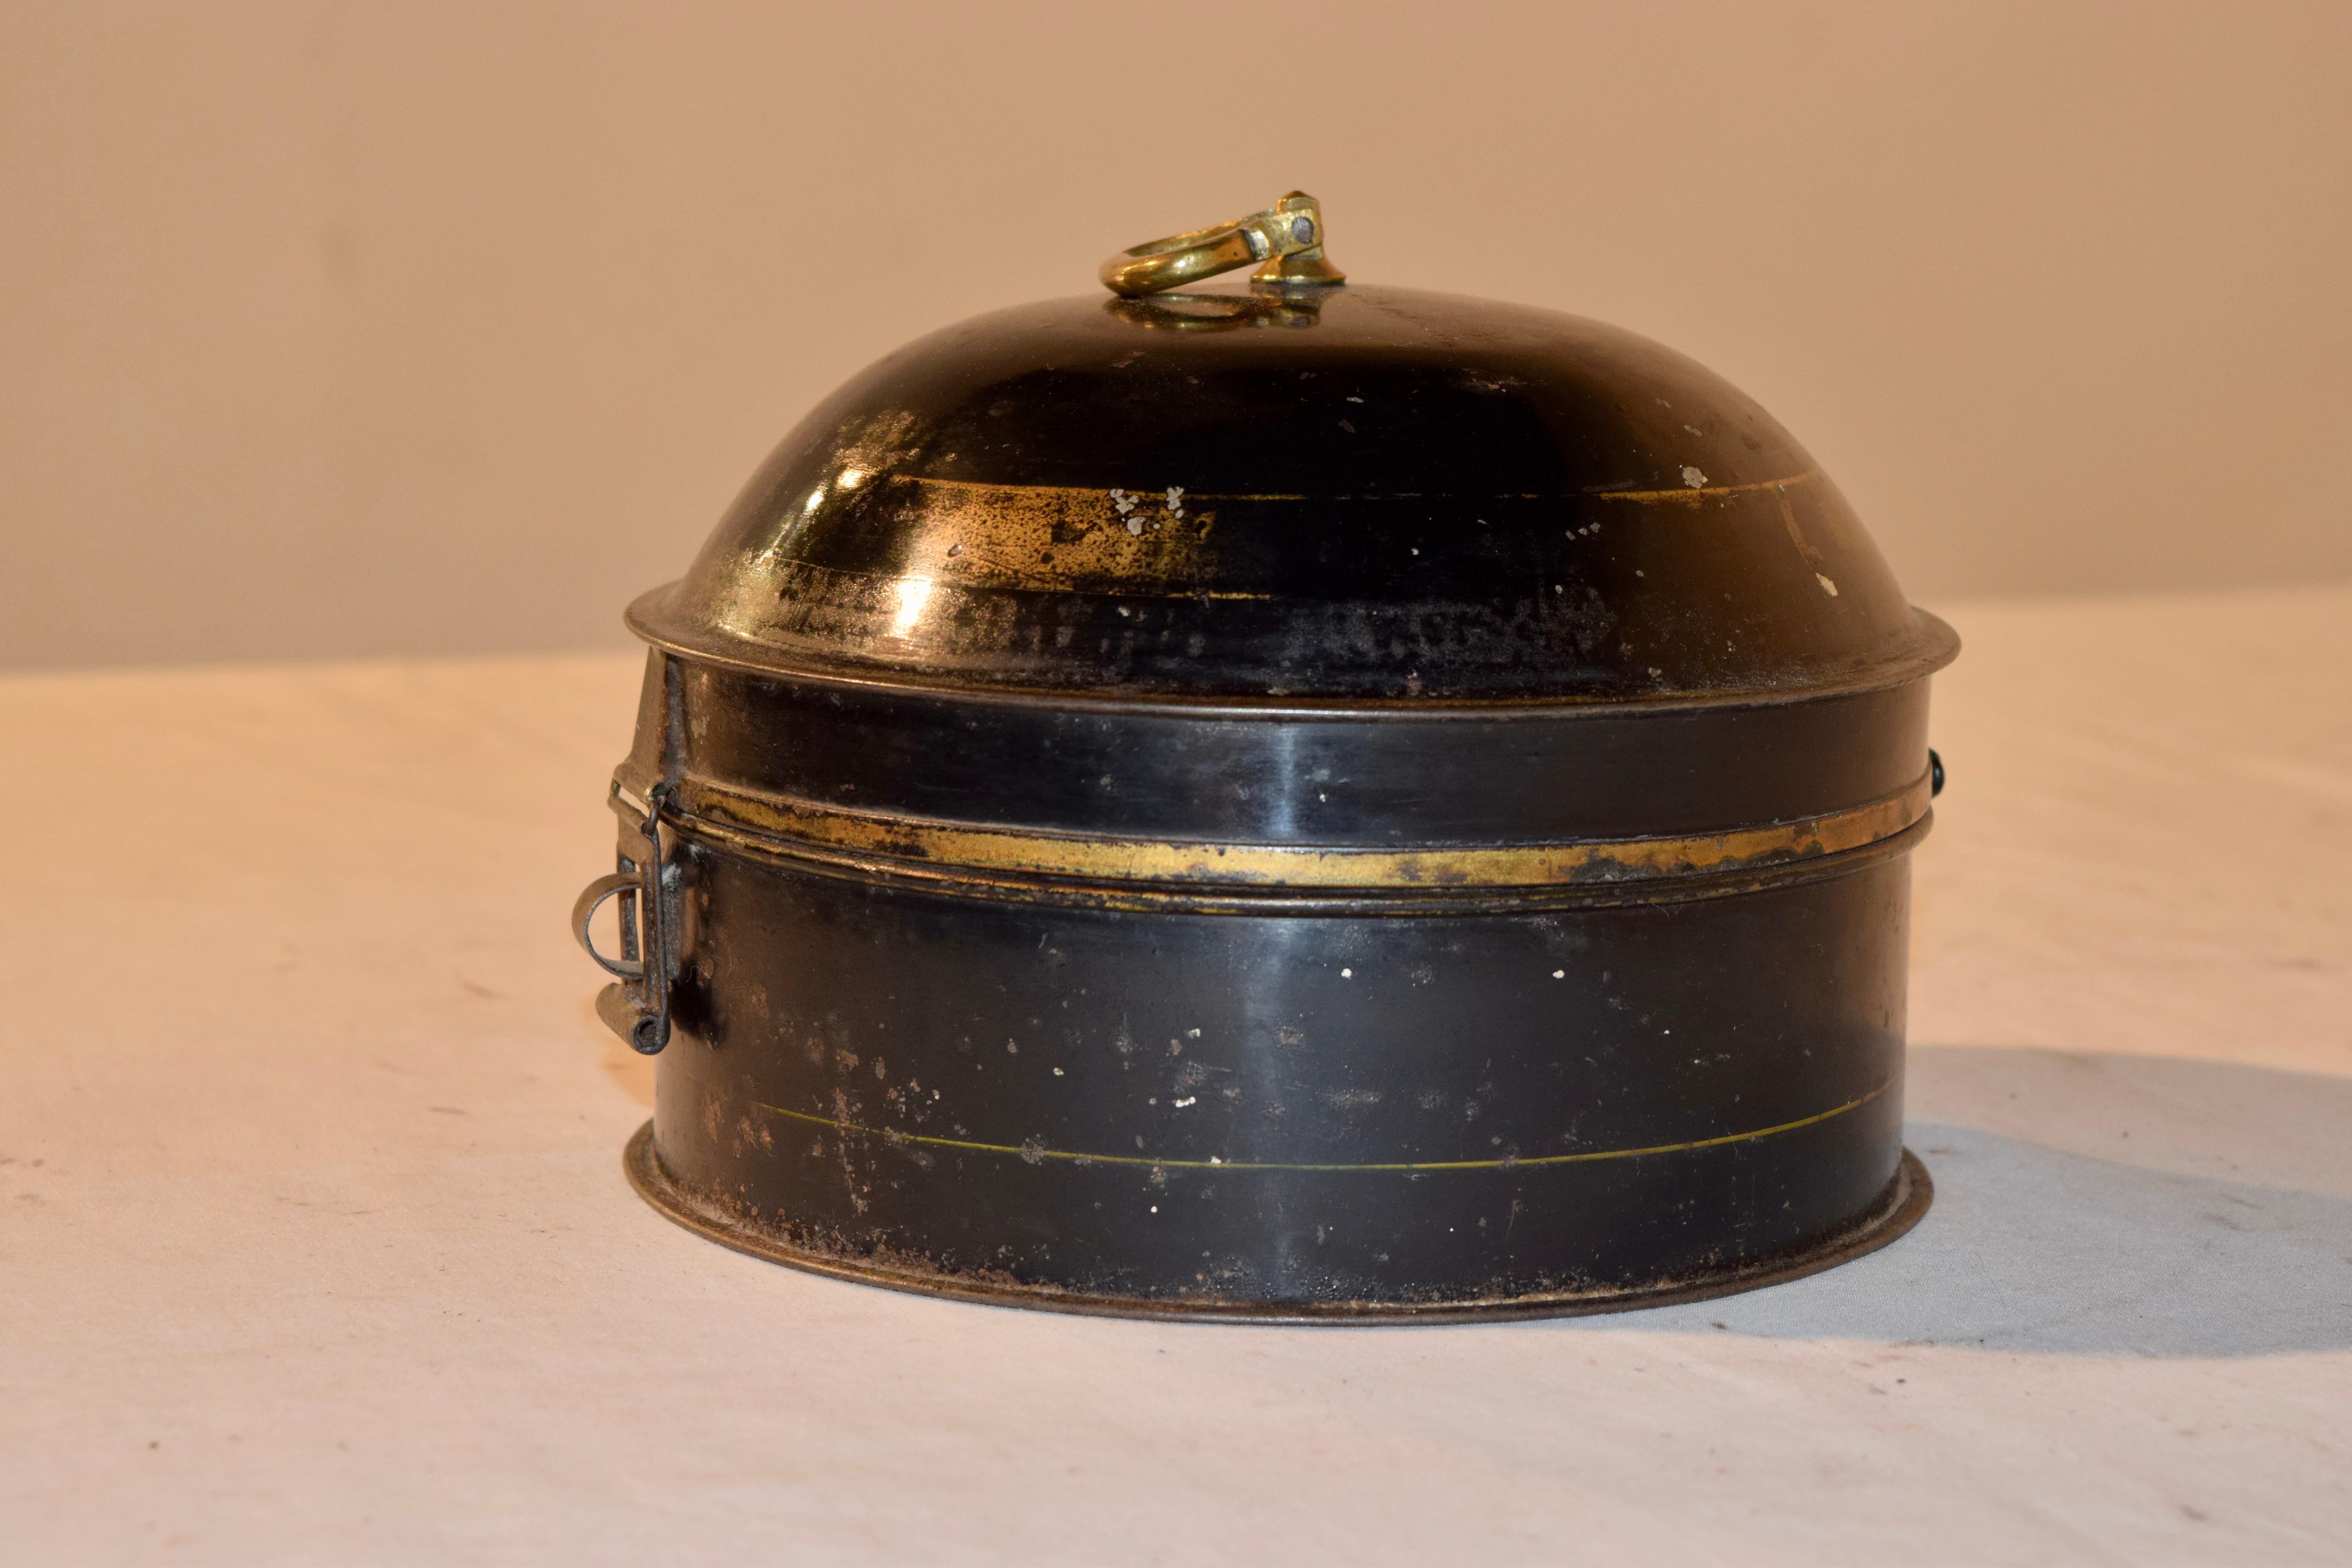 Lovely original antique spice container, internally divided into six compartments. It is a lovely looking tin with a domed top and small brass handle on the top. There is a catch at the front to hold it closed. It is painted black and there are